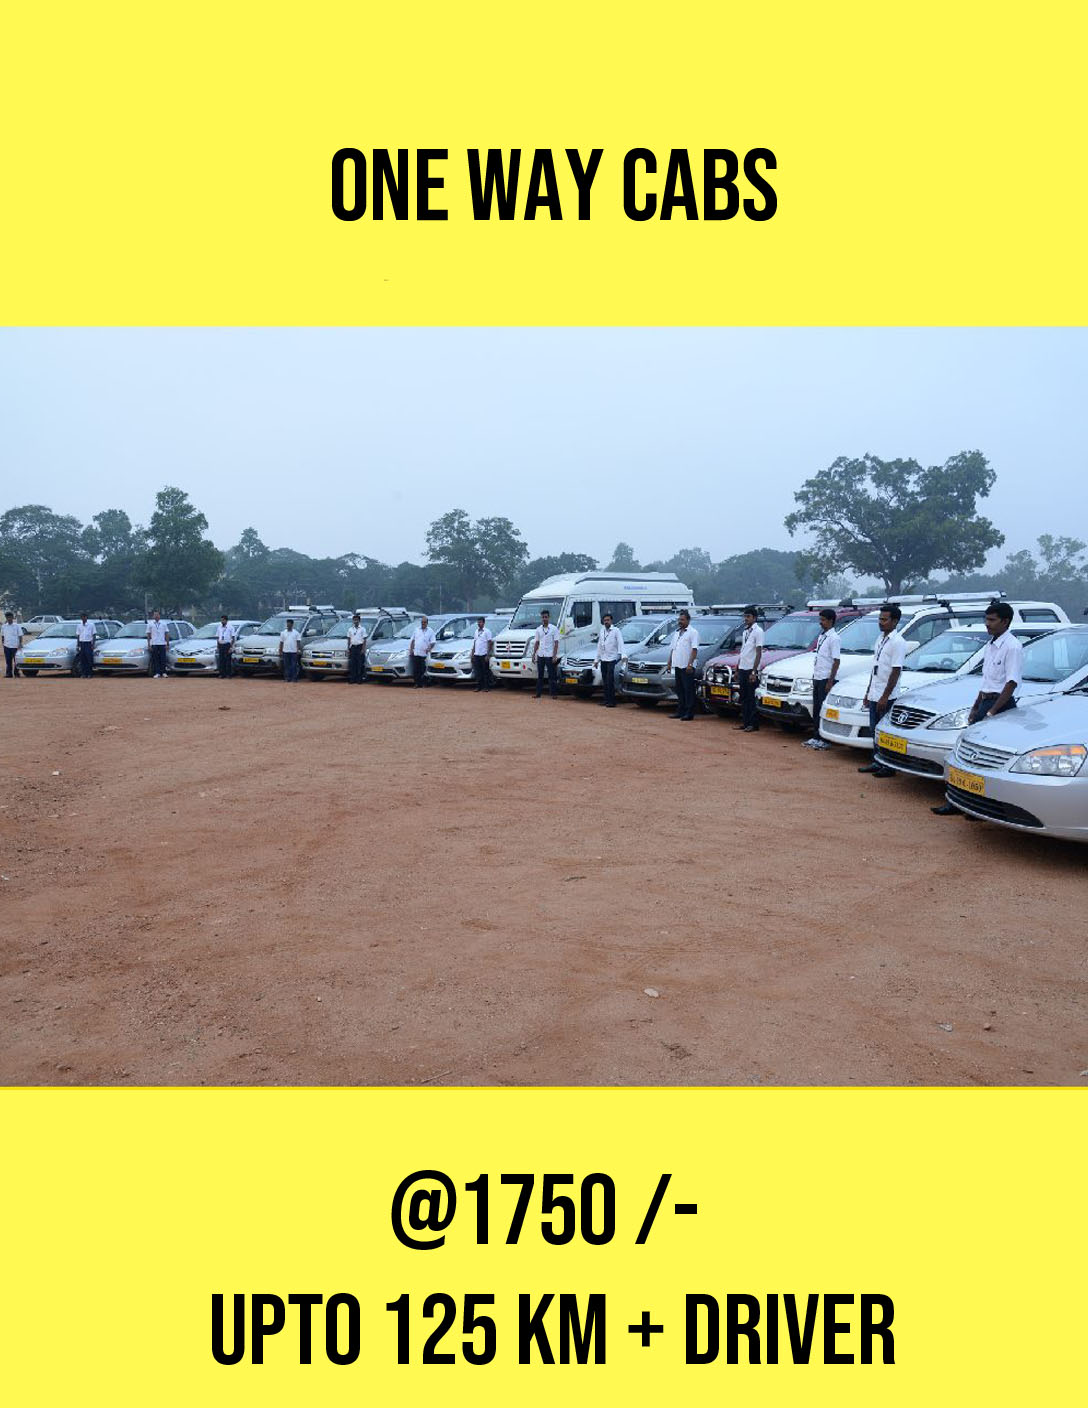 coorg-one-way-cabs-fare